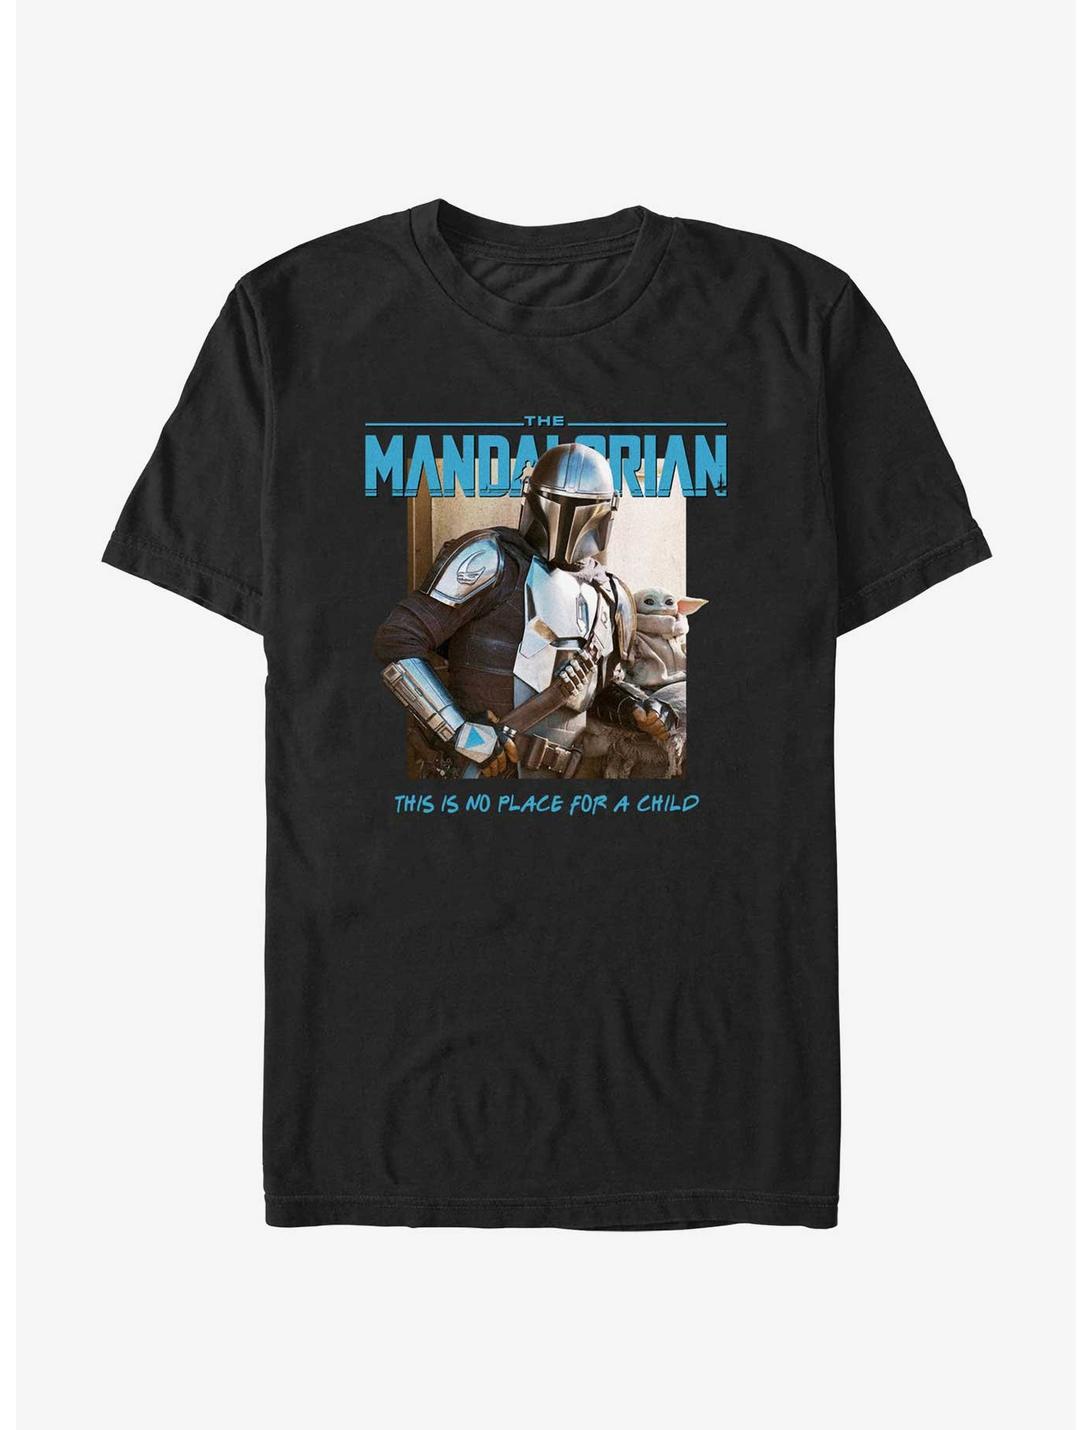 Star Wars The Mandalorian This Is No Place For A Child T-Shirt, BLACK, hi-res